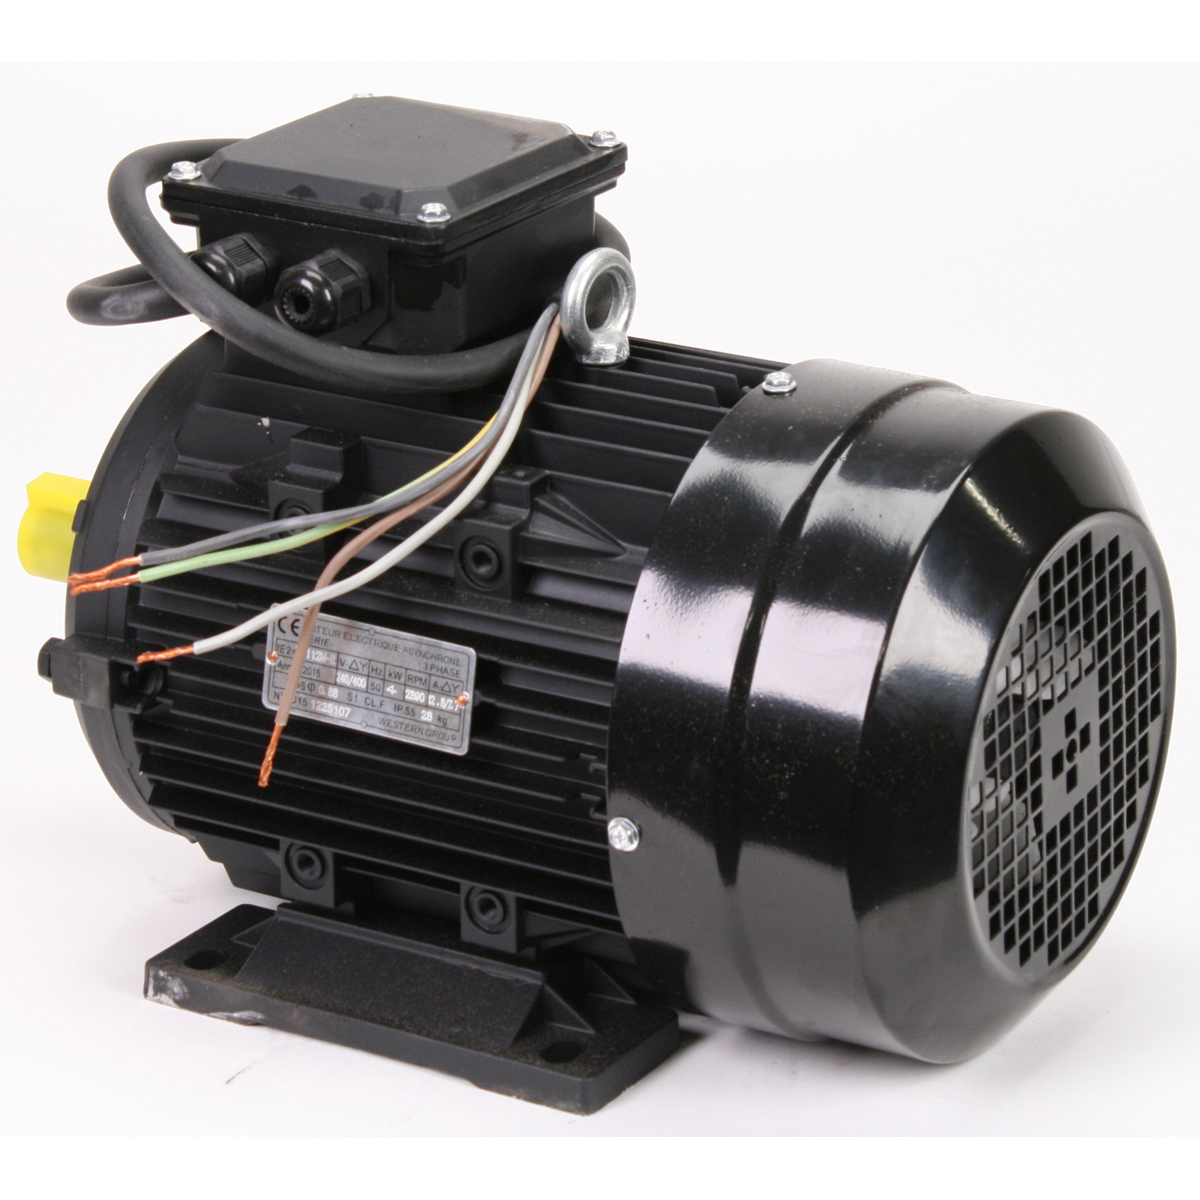 Air compressor Electrical Motor 5.5hp 4kw